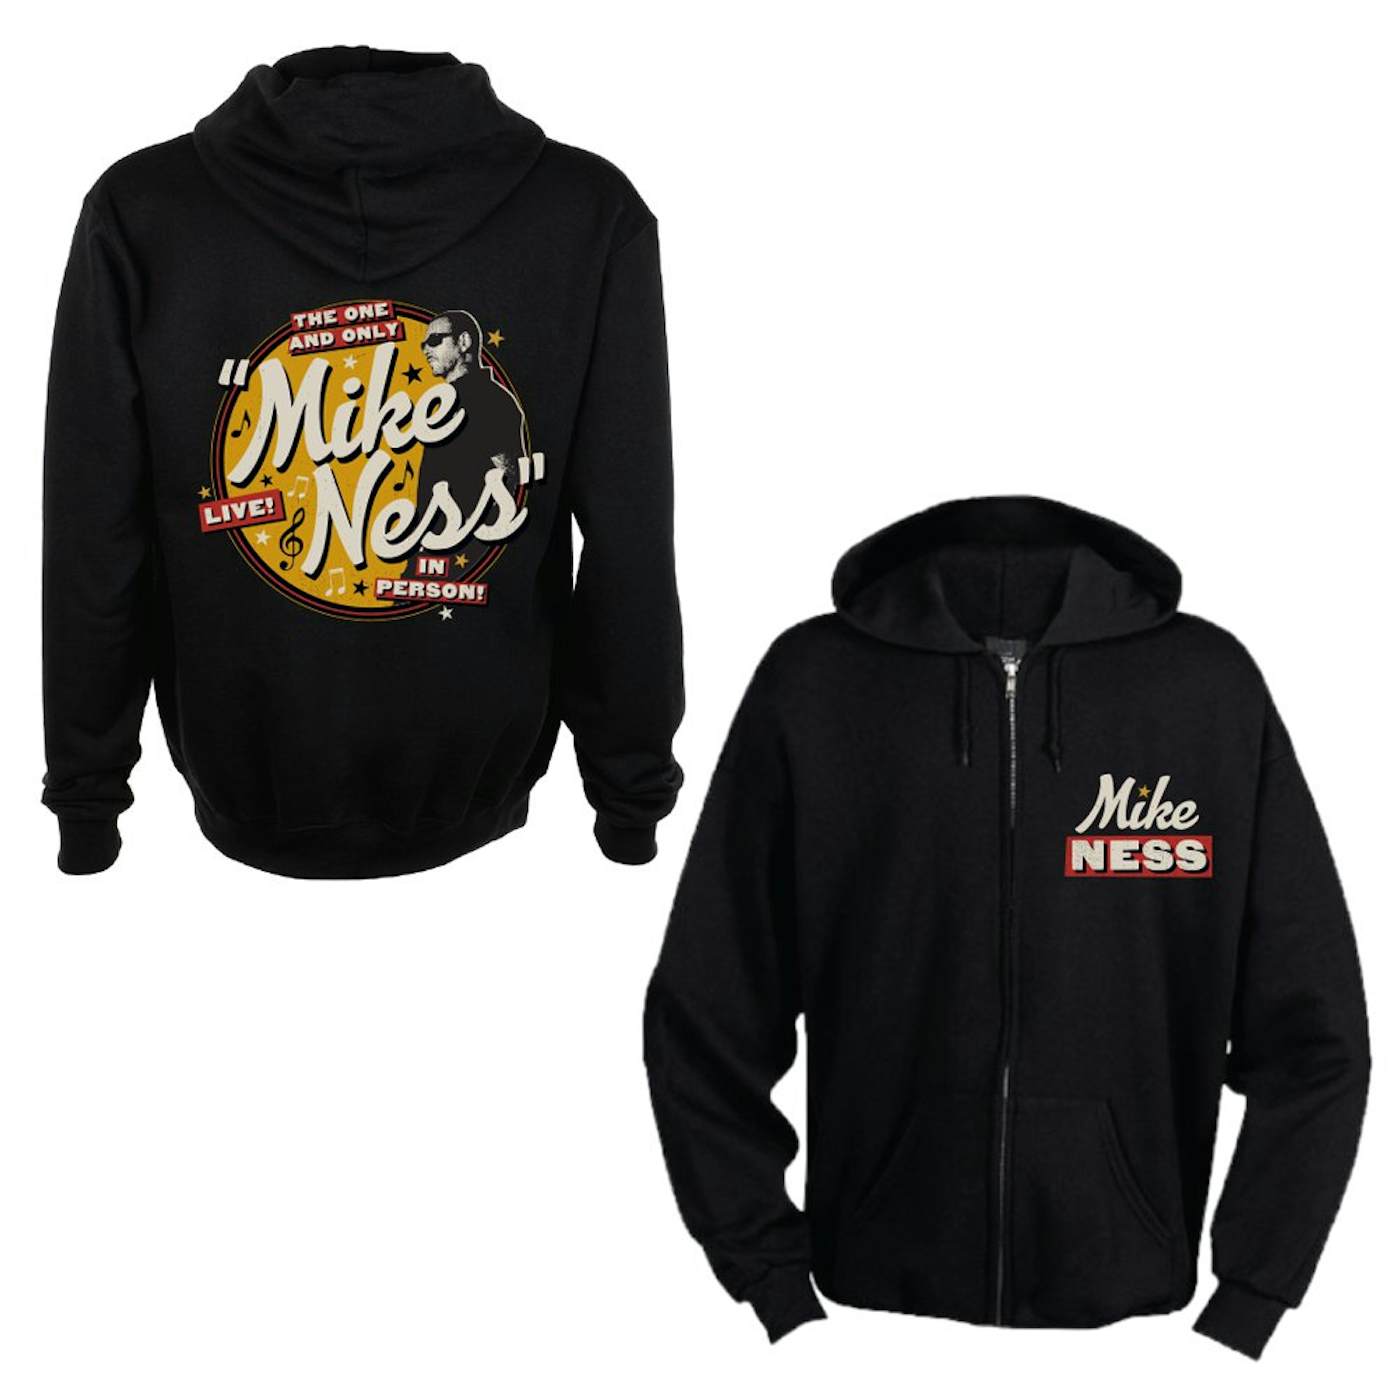 Mike Ness The One & Only Women's Zip-Up Hoodie (Black) Women